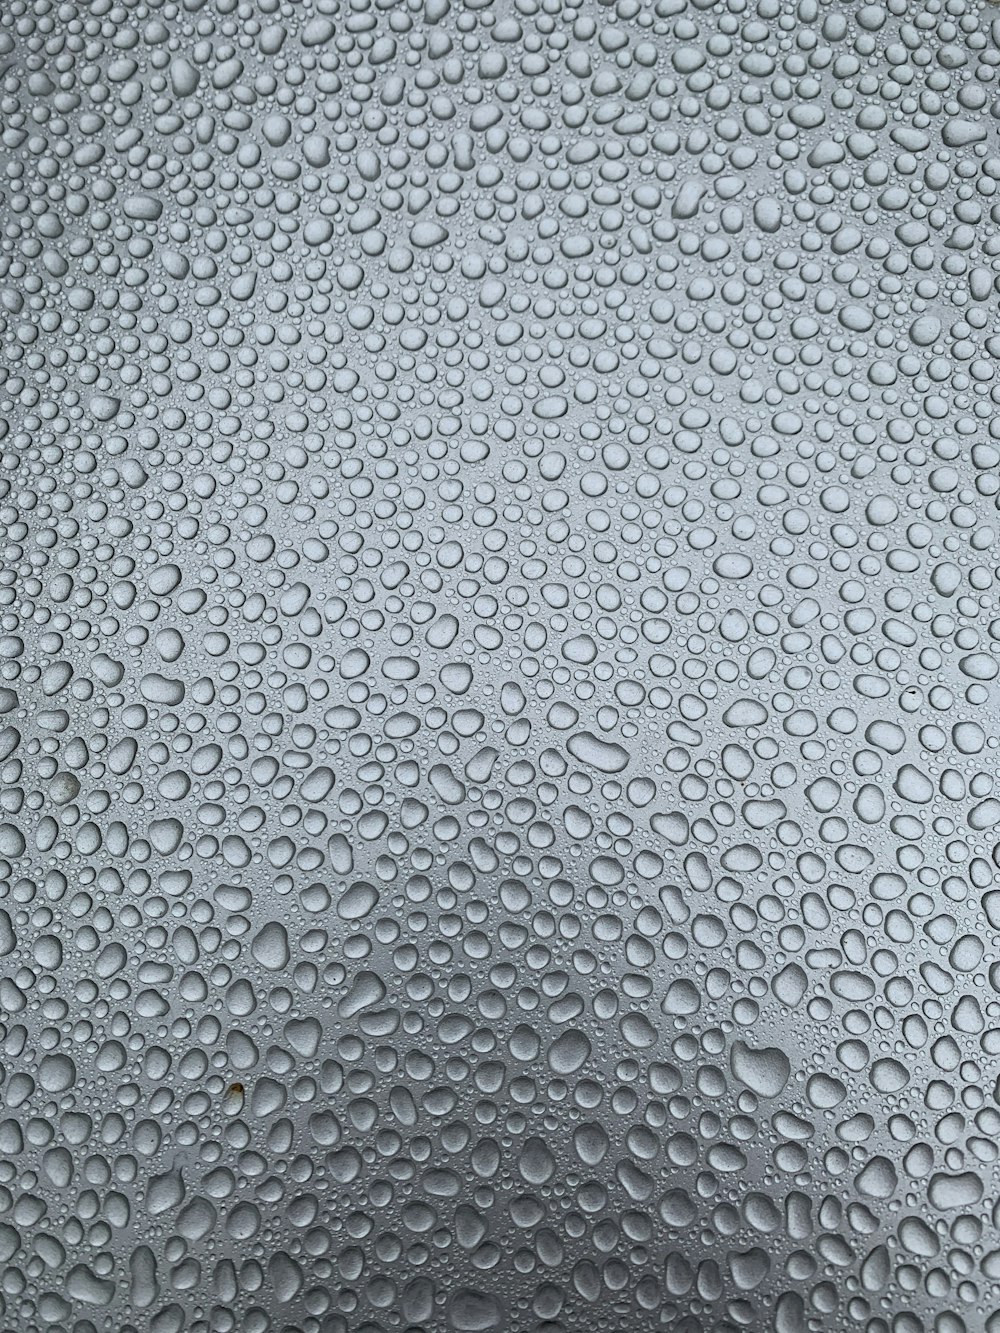 a close up of water droplets on a glass surface